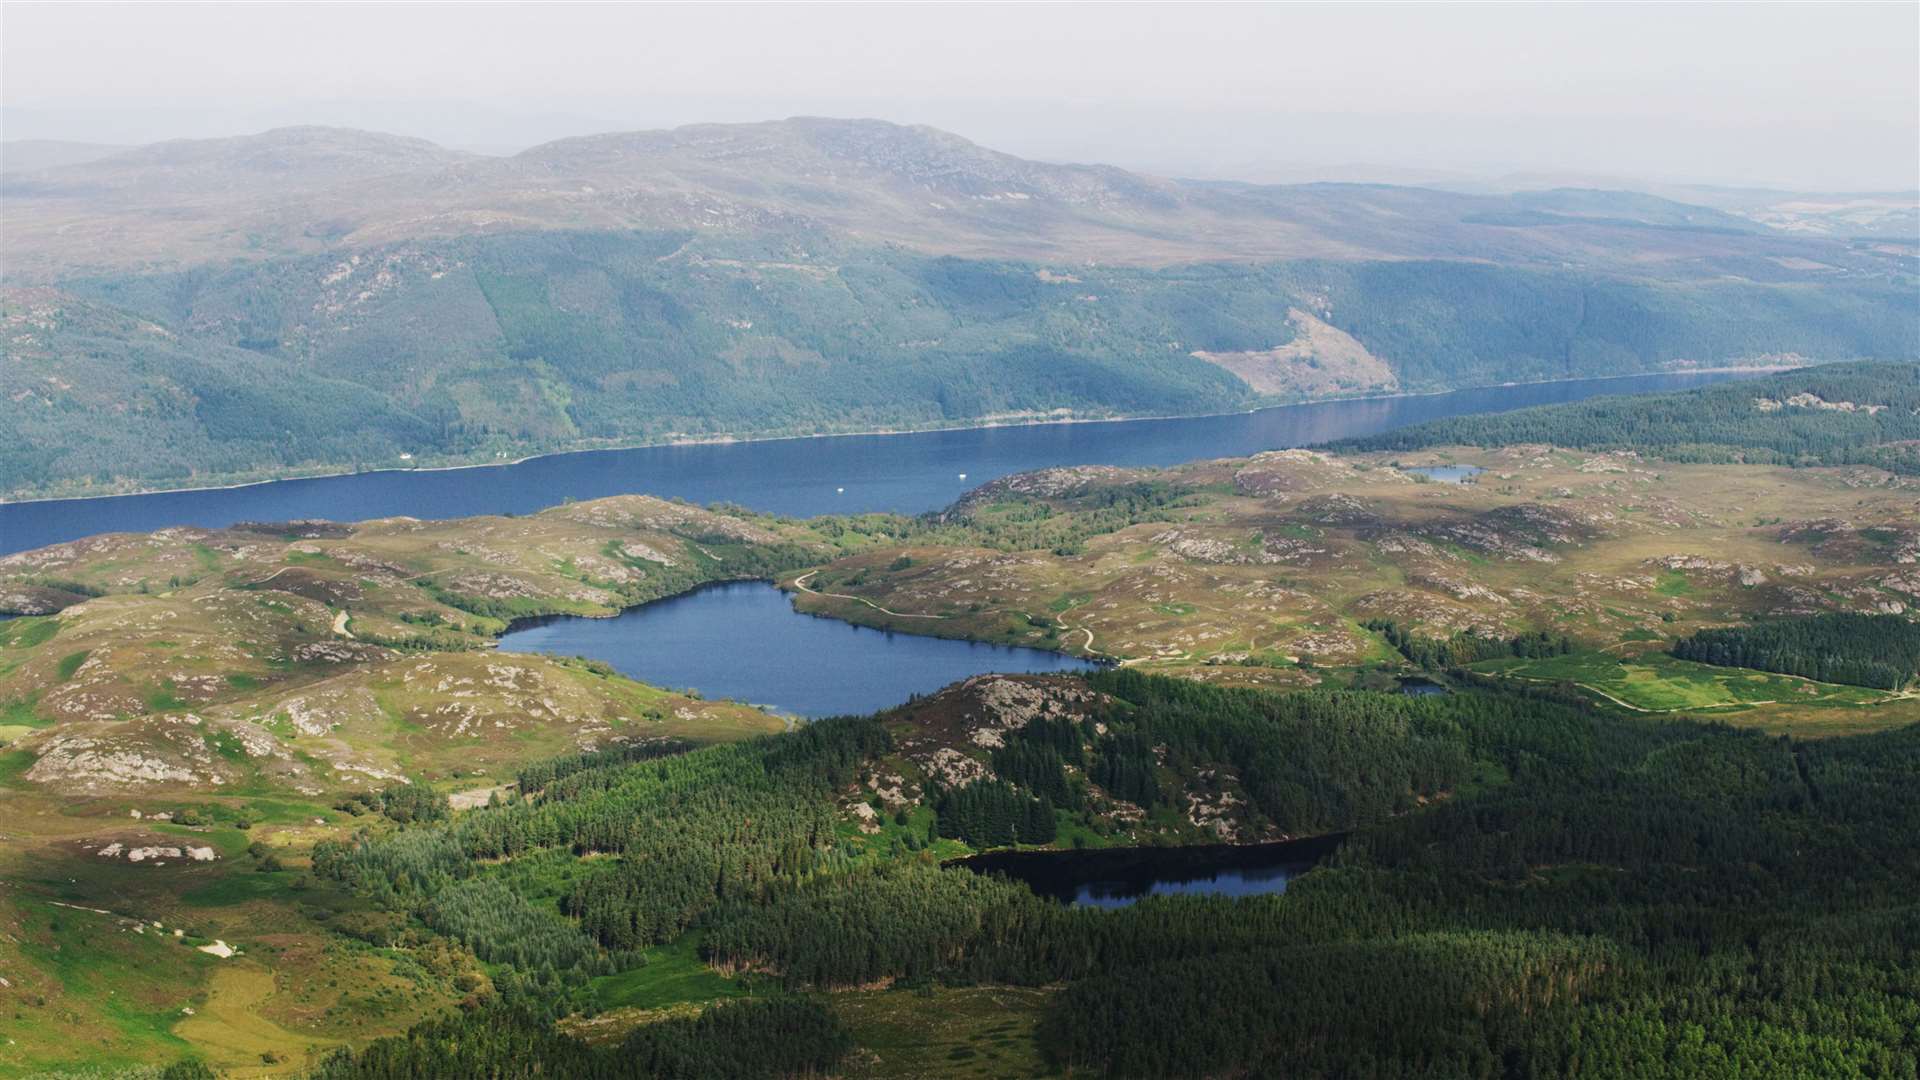 Plans have been unveiled for a pumped storage hydro scheme at Loch Kemp close to Loch Ness.